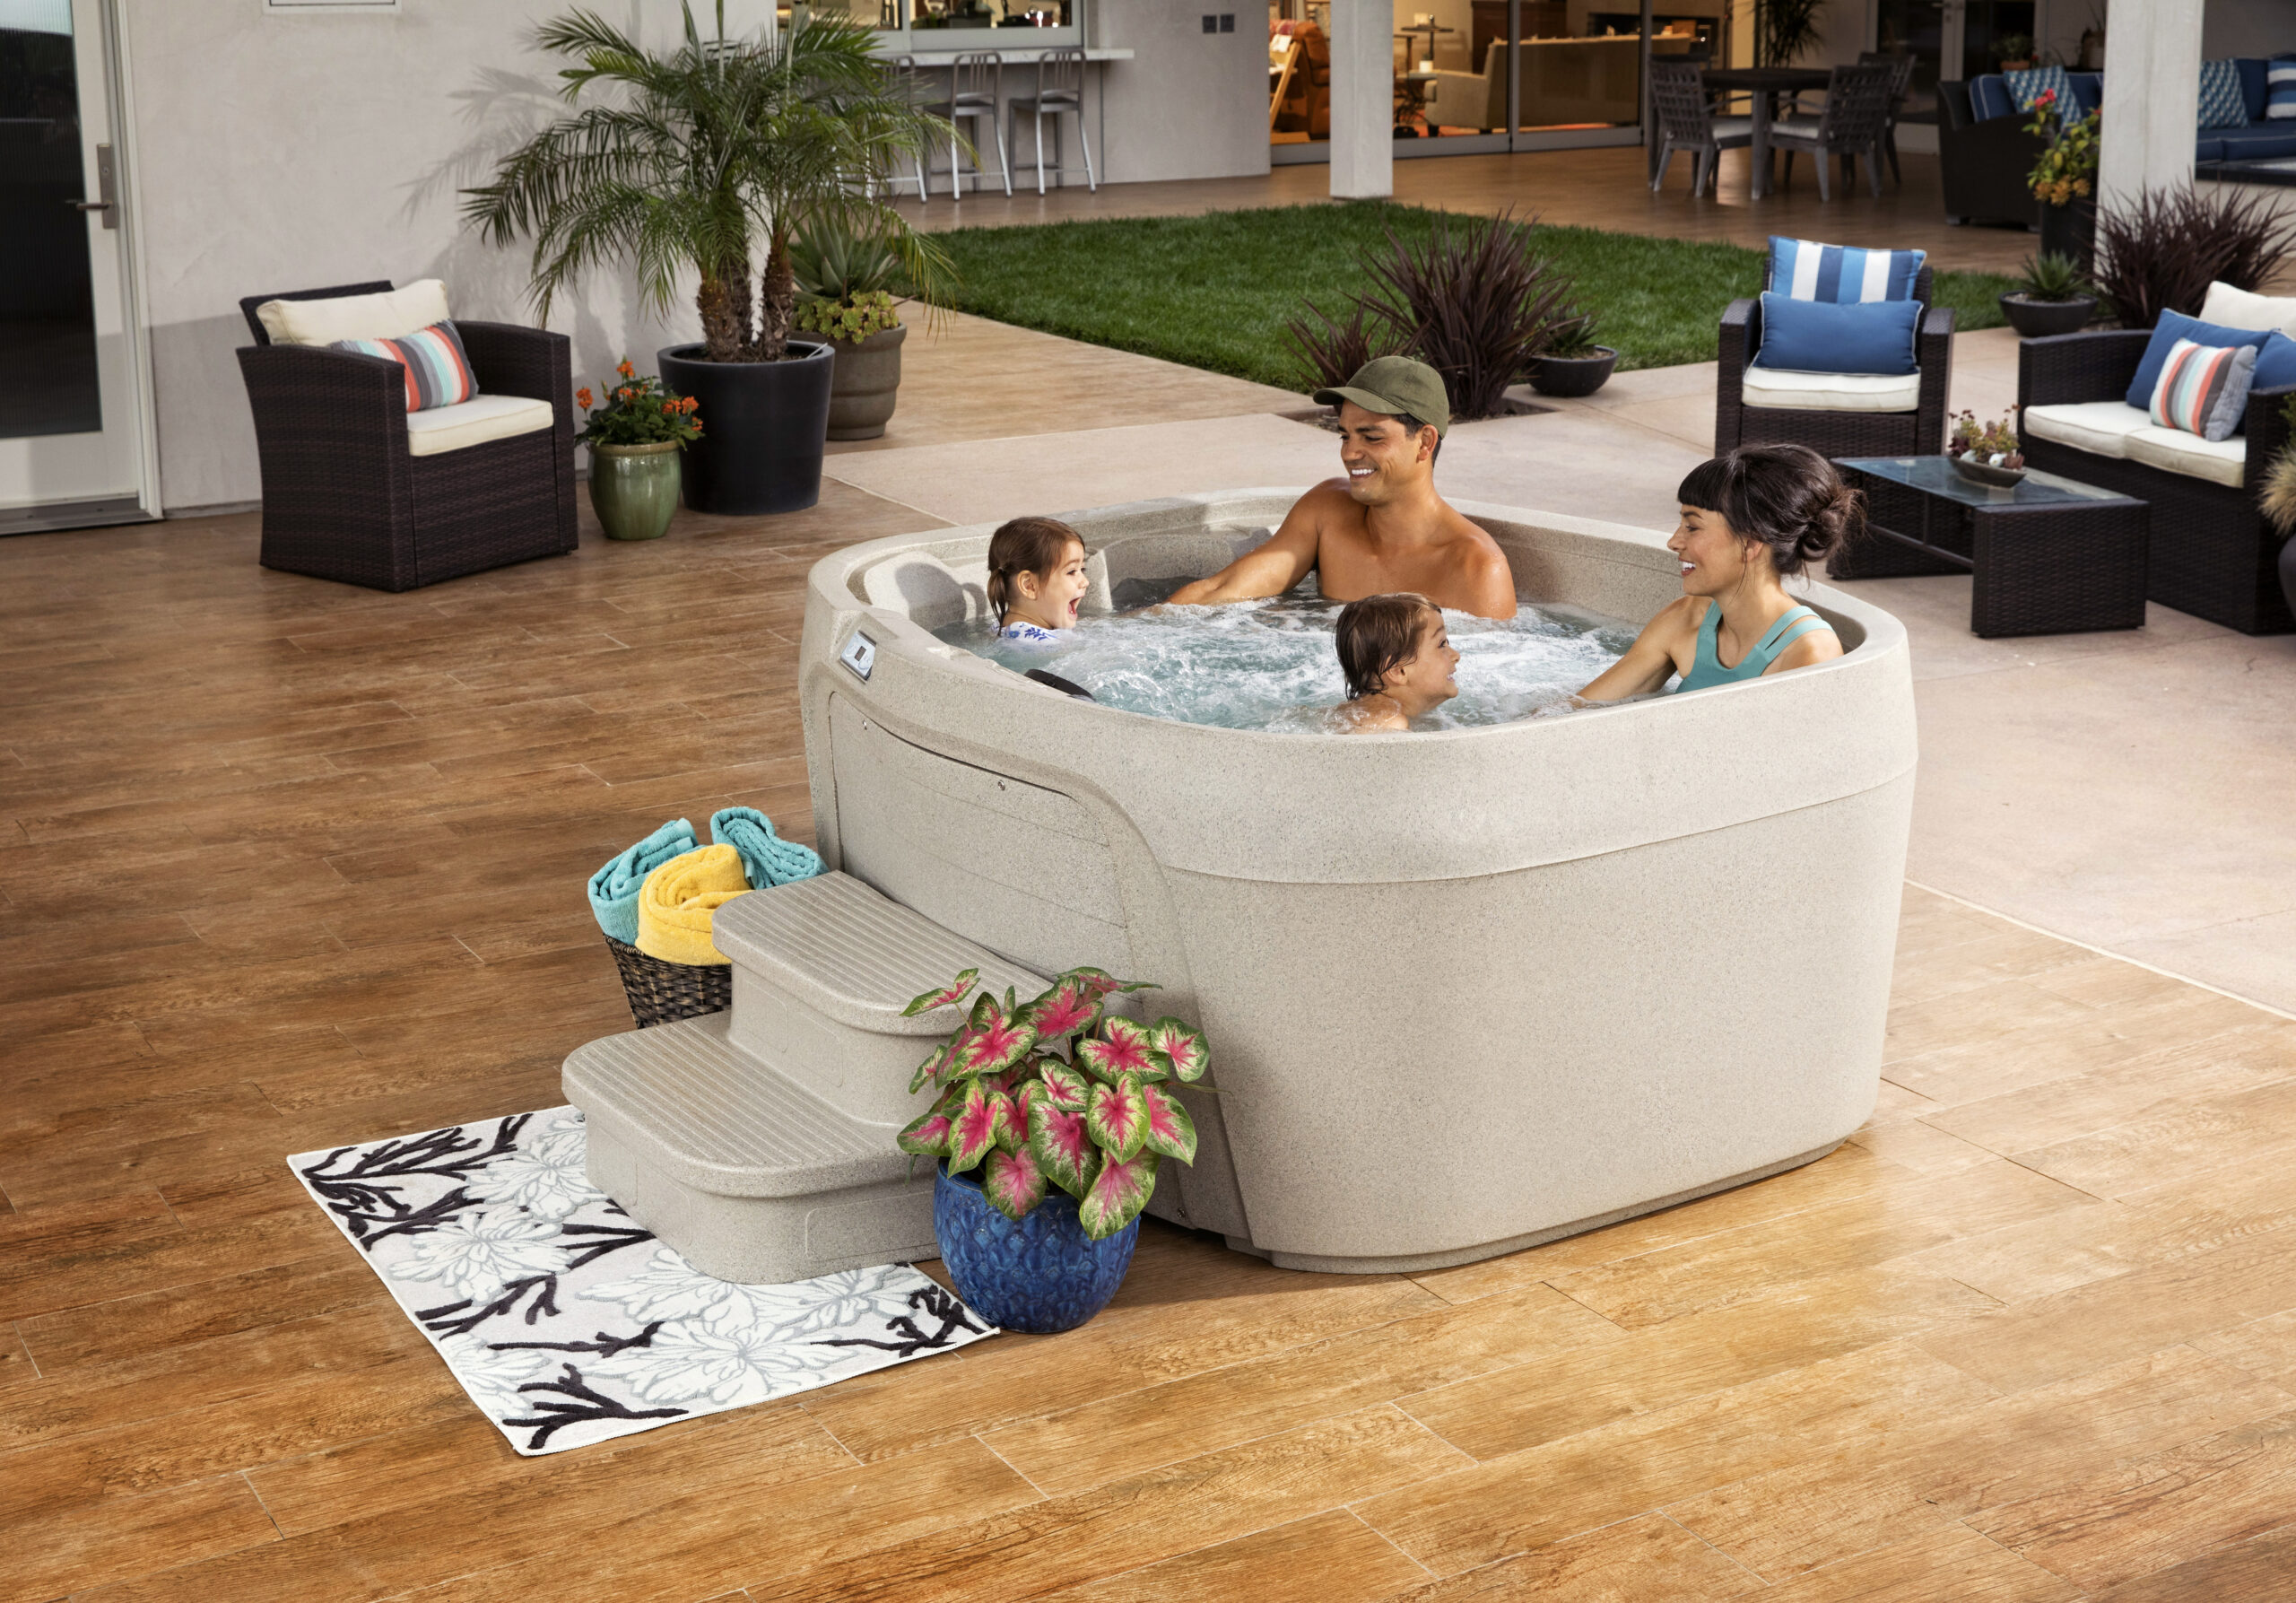 This is a lifestyle commercial photograph taken on location by Skip O'Donnell off ODonnell photograf of a Cascina hot tub for Watkins Spa in Solana Beach, San Diego, California